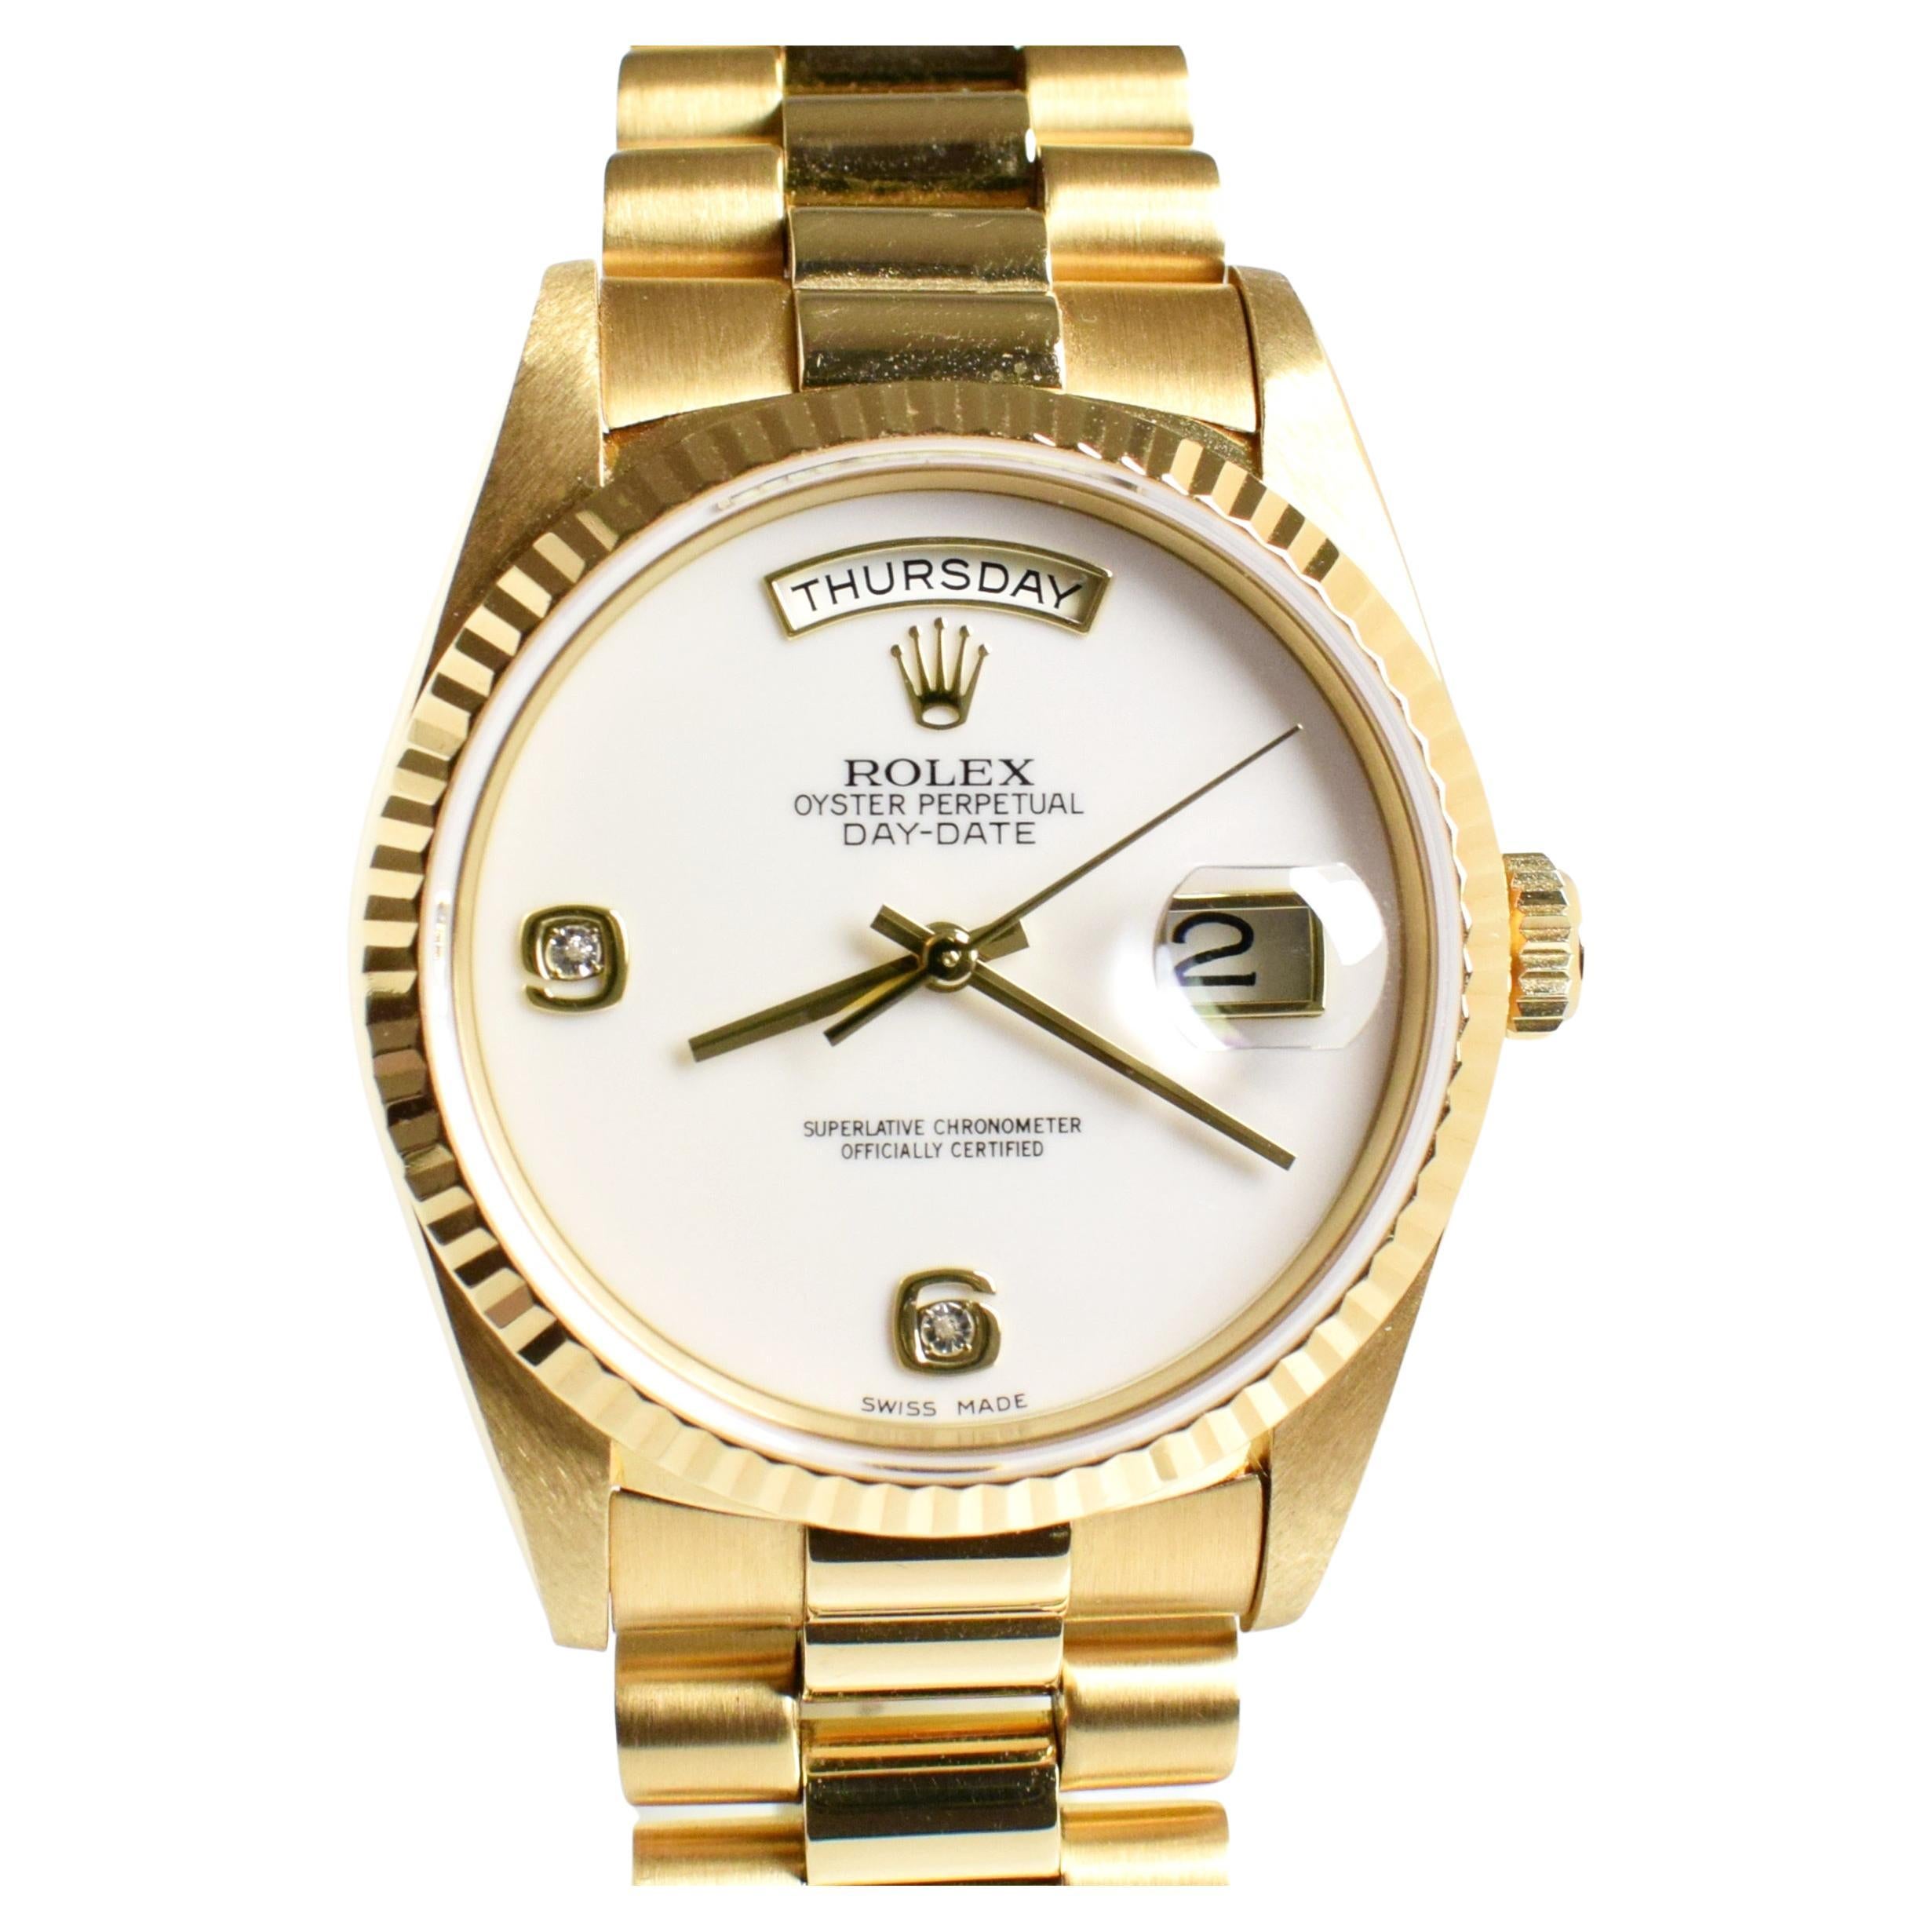 Rolex Day-Date 18K Yellow Gold Watch White Agate Stone Dial 18238 Full Set 1990